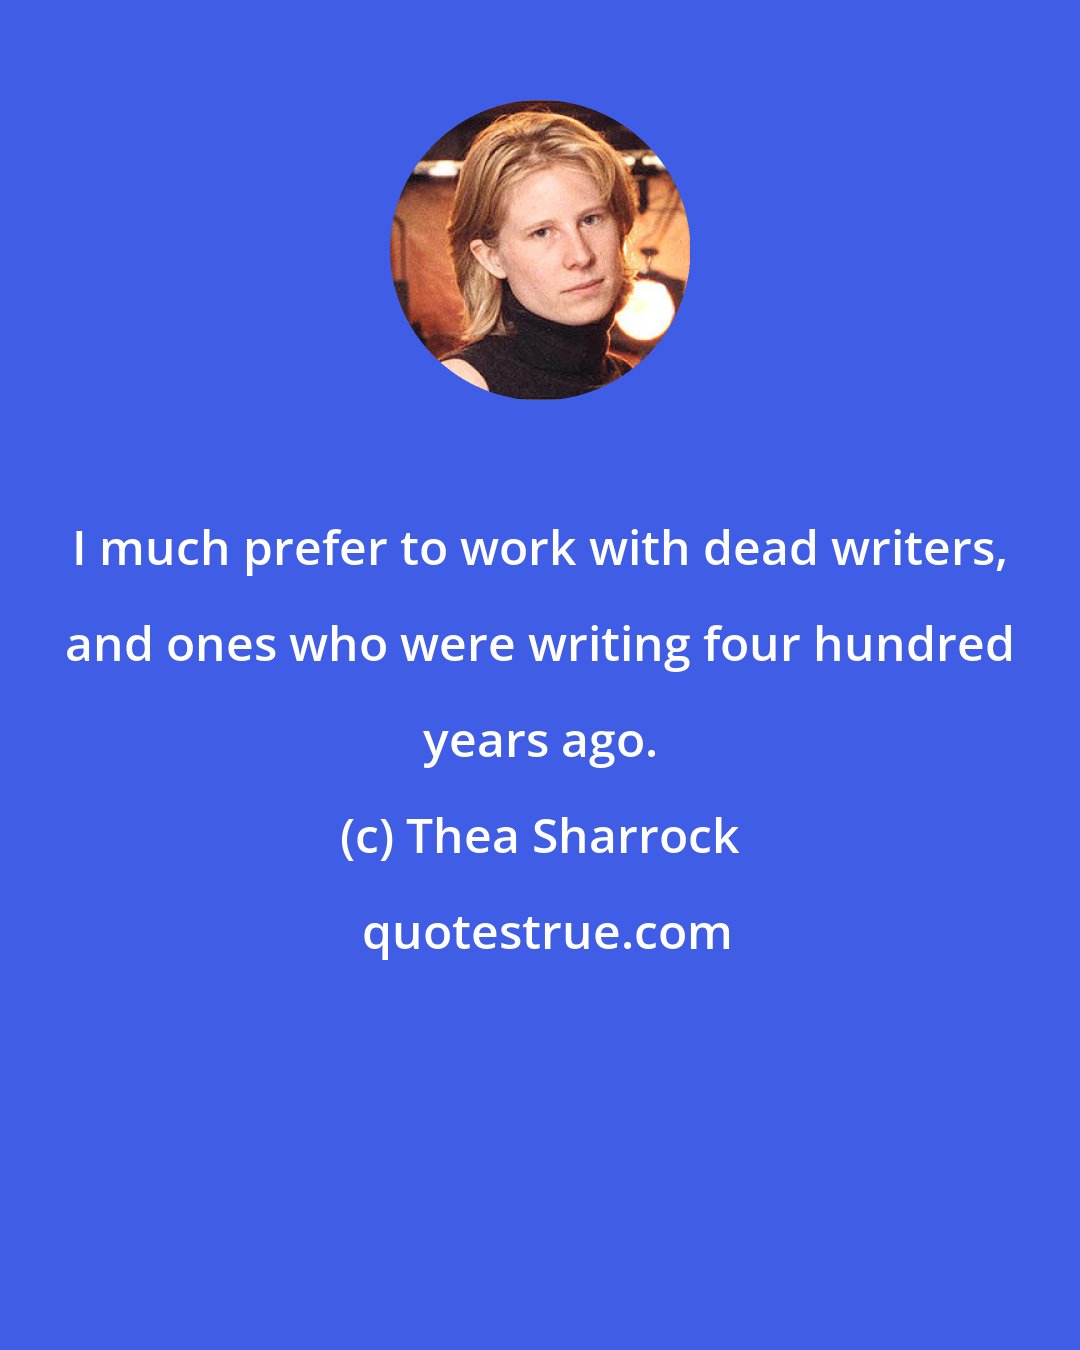 Thea Sharrock: I much prefer to work with dead writers, and ones who were writing four hundred years ago.